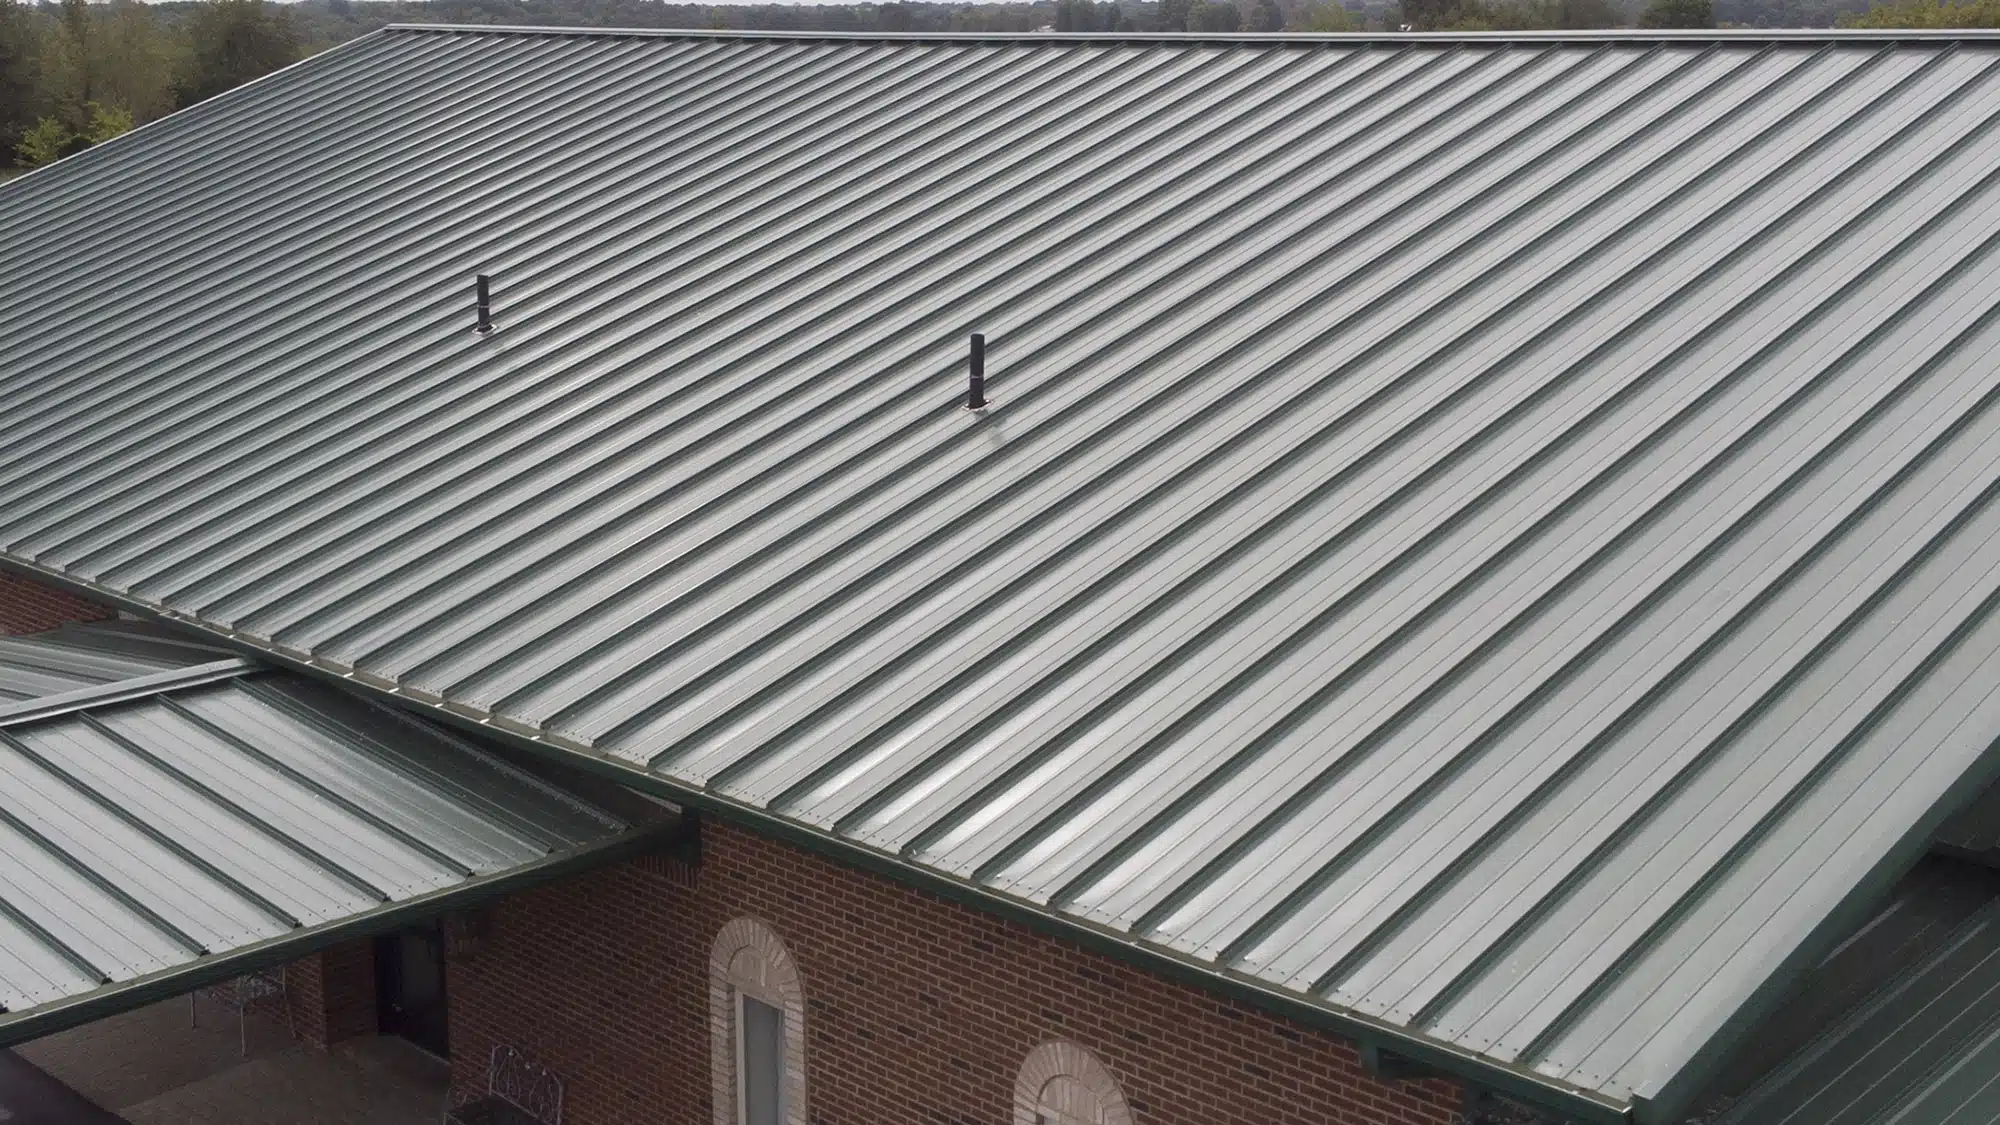 Central-Loc Evergreen Roof on a Church Building